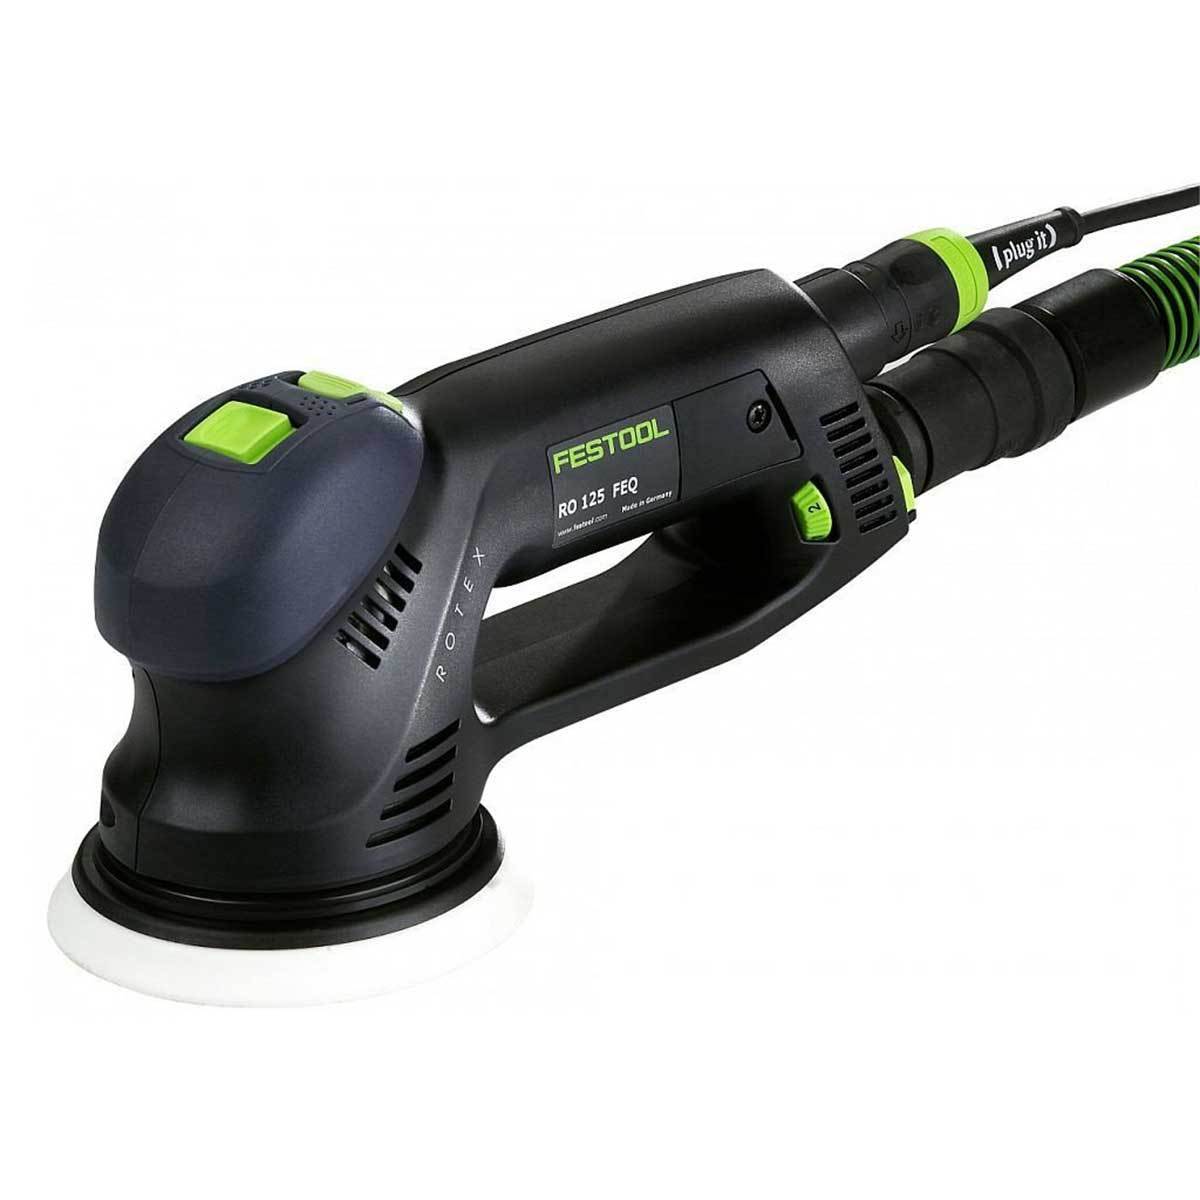 The Festool RO 125 FEQ-Plus Multi-Mode Rotex Sander is compact and lightweight, yet very powerful with a 500 watt motor.